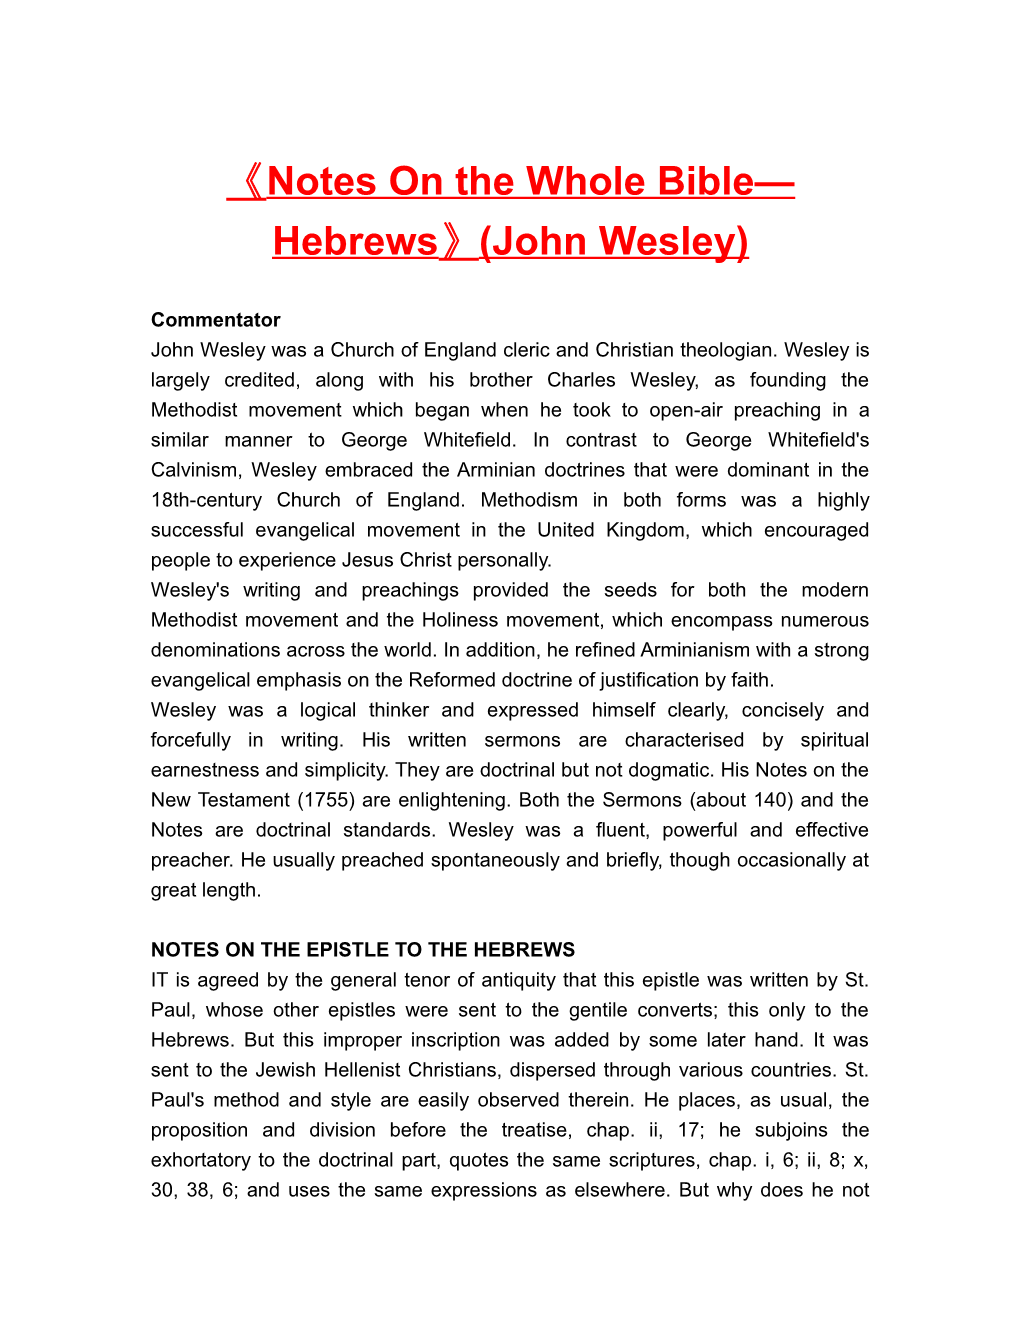 Notes on the Whole Bible Hebrews (John Wesley)